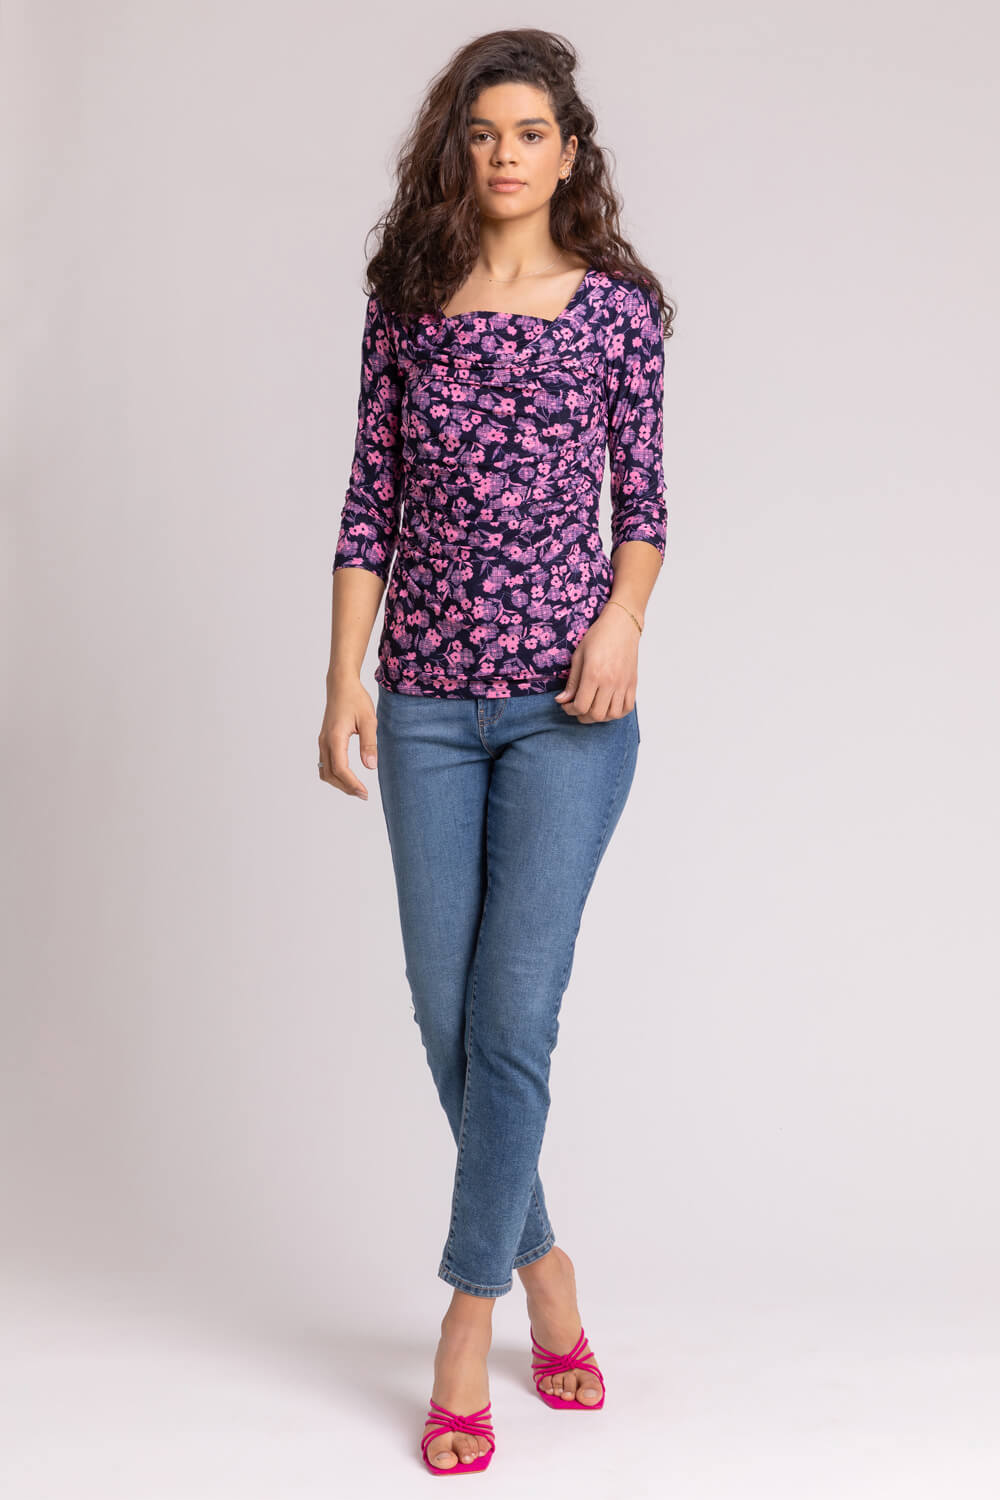 PINK Floral Print Cowl Neck Top, Image 3 of 4